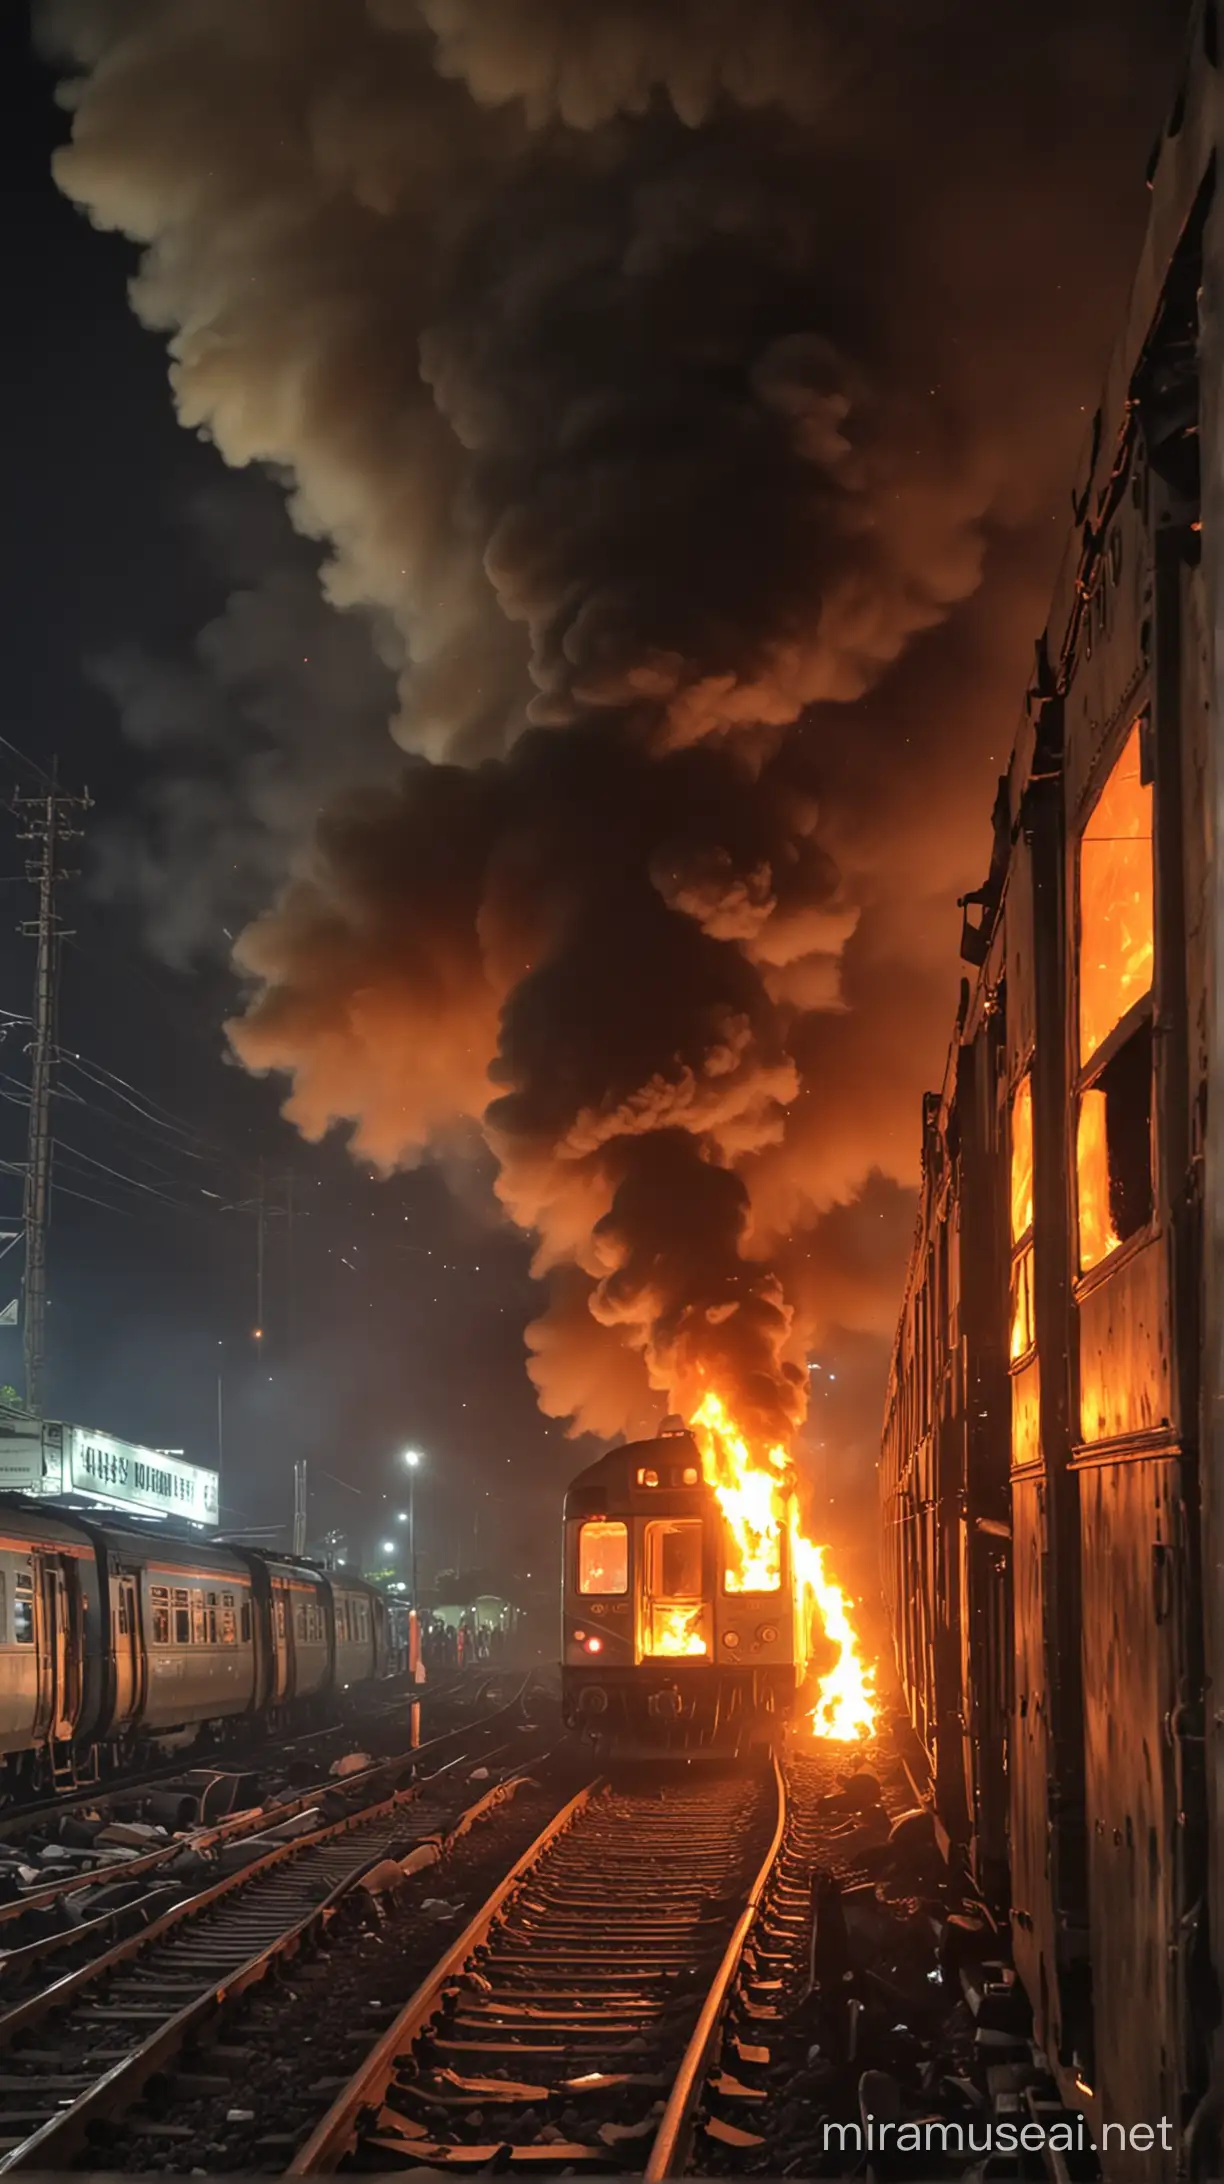 Nighttime Train Fire Tense Atmosphere and Locals Capturing the Scene